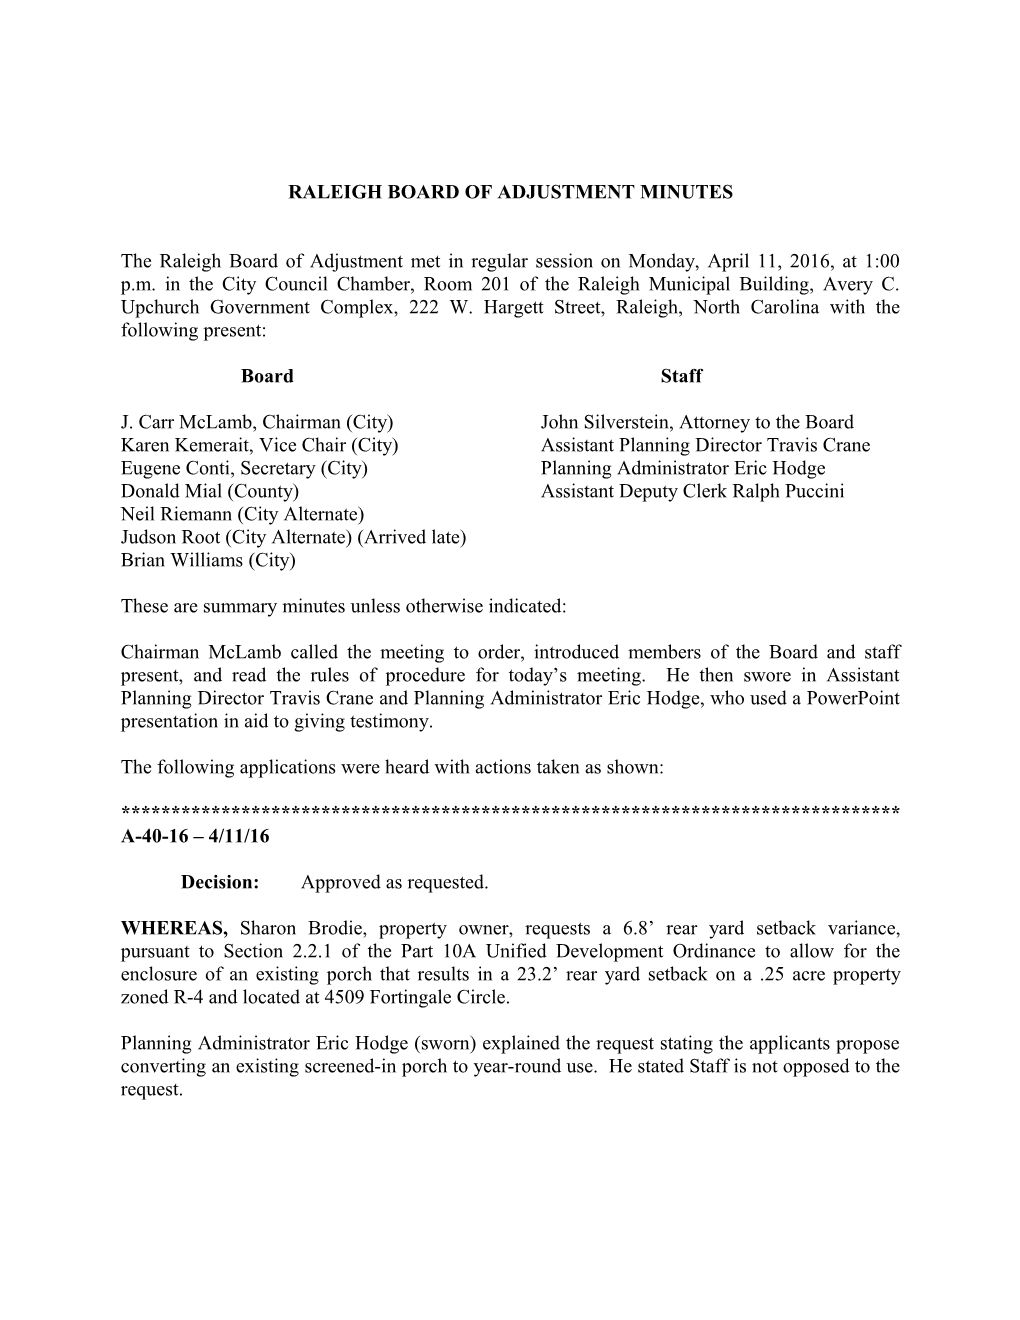 Raleigh Board of Adjustment Minutes - 04/11/2016